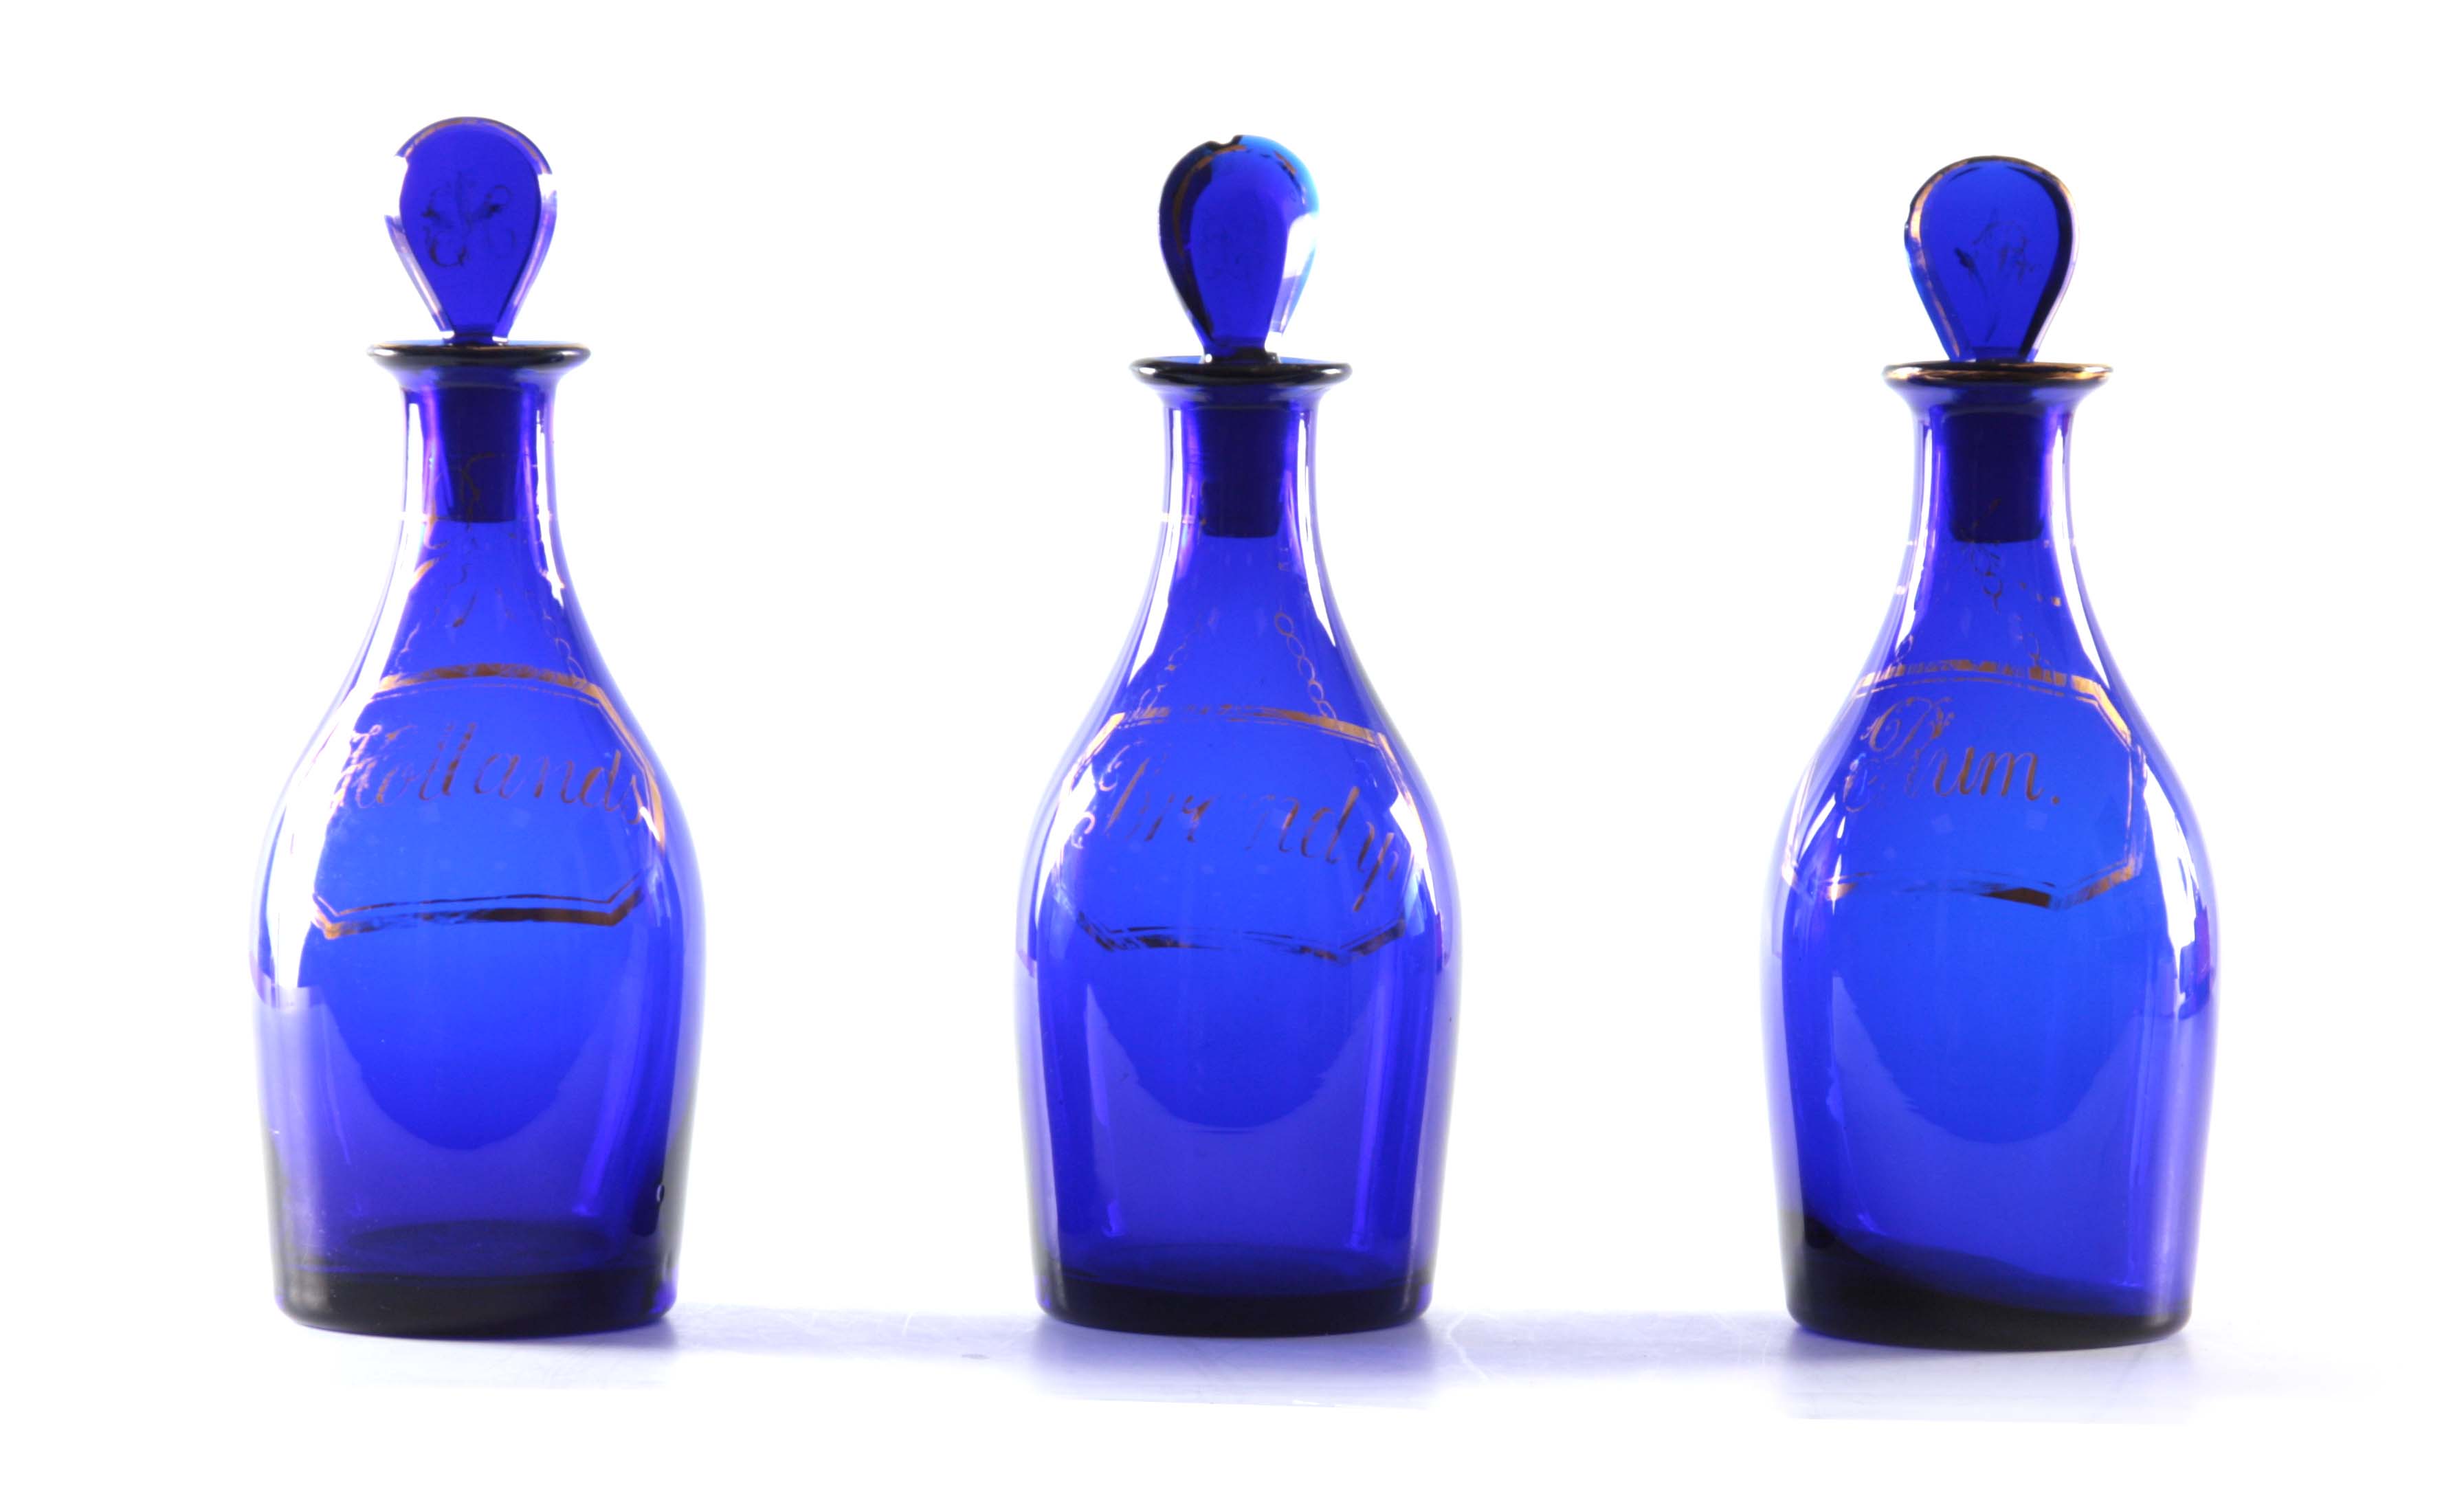 A SET OF THREE EARLY 19TH CENTURY BRISTOL BLUE GLASS DECANTERS for Rum, Brandy and Hollands with